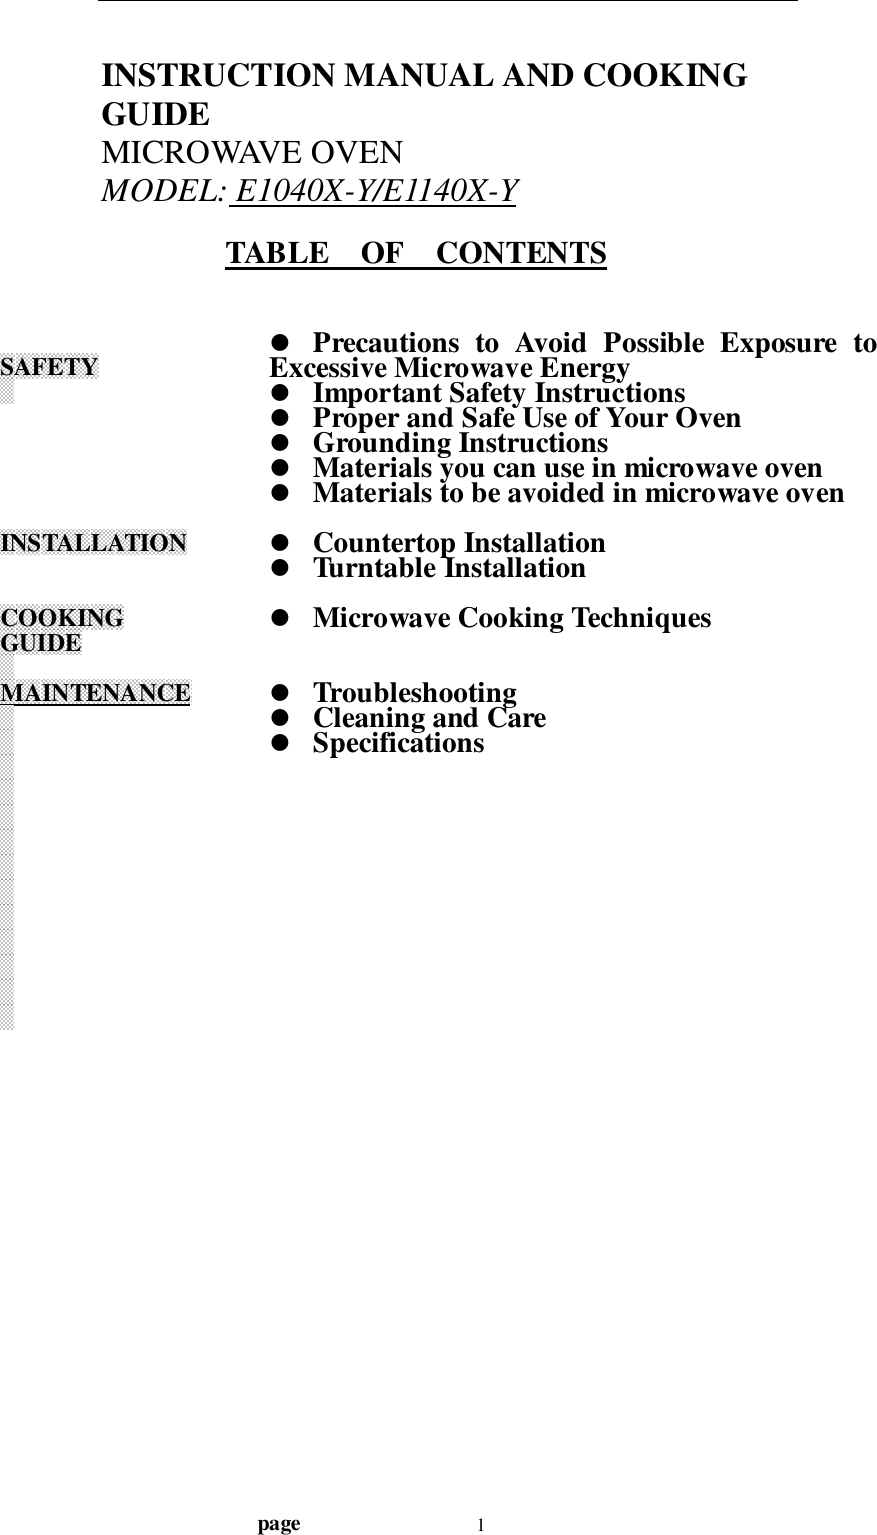                                  page 1INSTRUCTION MANUAL AND COOKINGGUIDEMICROWAVE OVENMODEL: E1040X-Y/E1140X-YTABLE    OF    CONTENTSSAFETYINSTALLATIONCOOKINGGUIDEMAINTENANCE! Precautions to Avoid Possible Exposure toExcessive Microwave Energy! Important Safety Instructions! Proper and Safe Use of Your Oven! Grounding Instructions! Materials you can use in microwave oven! Materials to be avoided in microwave oven! Countertop Installation! Turntable Installation! Microwave Cooking Techniques! Troubleshooting! Cleaning and Care! Specifications